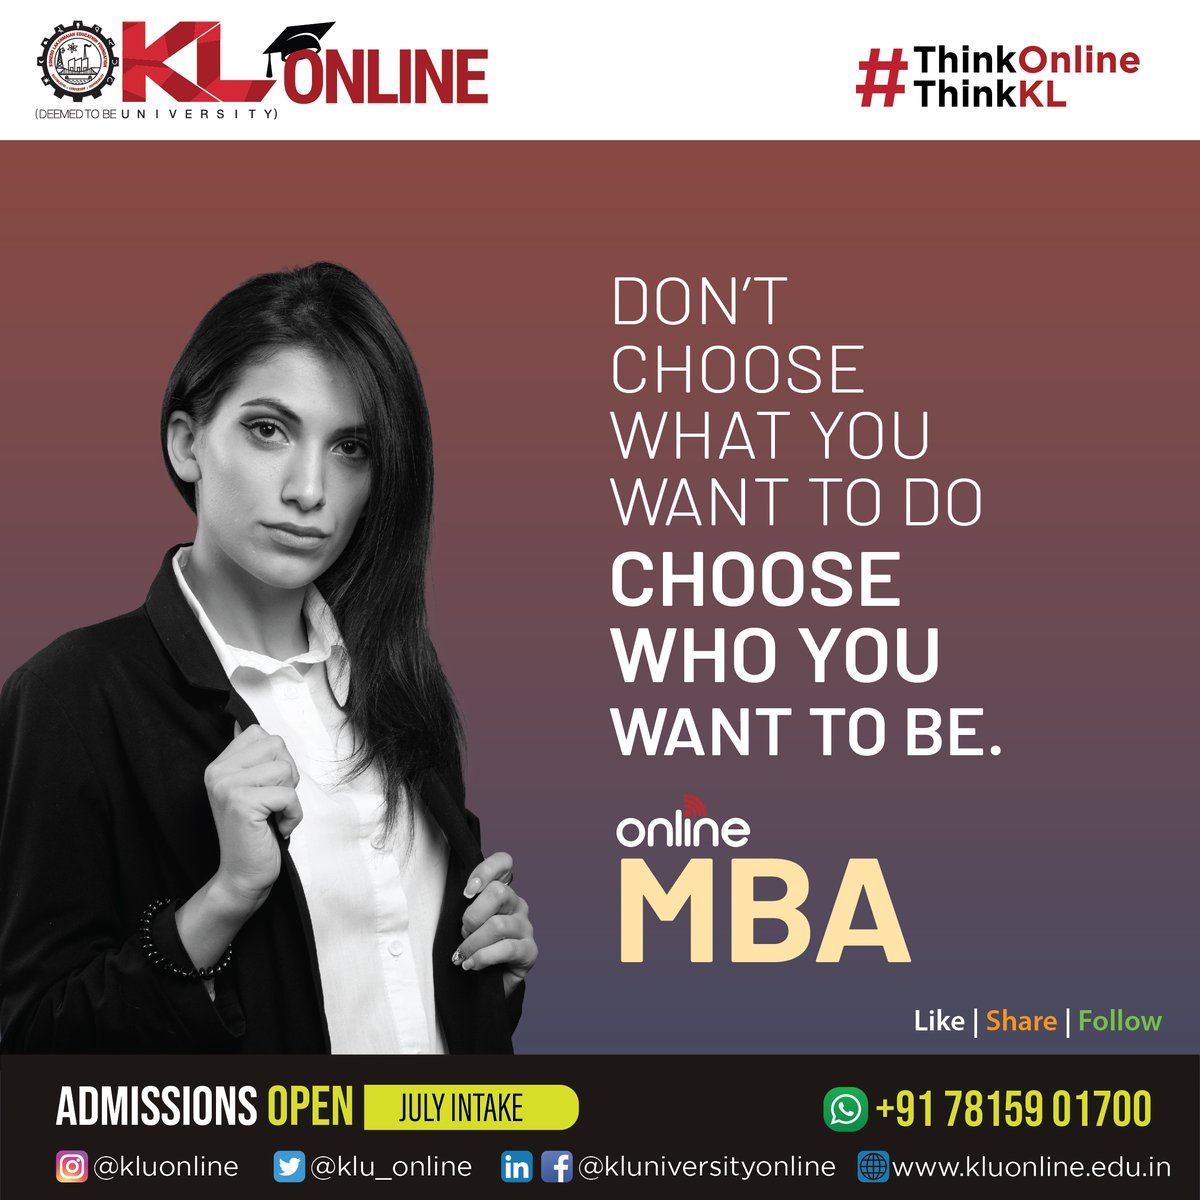 Shape your future with our Online MBA program! Join us for the July intake and embark on transformative journey towards becoming the leader you aspire to be. 

#KLOnline #KLUniversity #ThinkOnlineThinkKL #AdmissionsOpen2024 #Onlinedegree #onlinelearning #OnlineMBA #ugcourses